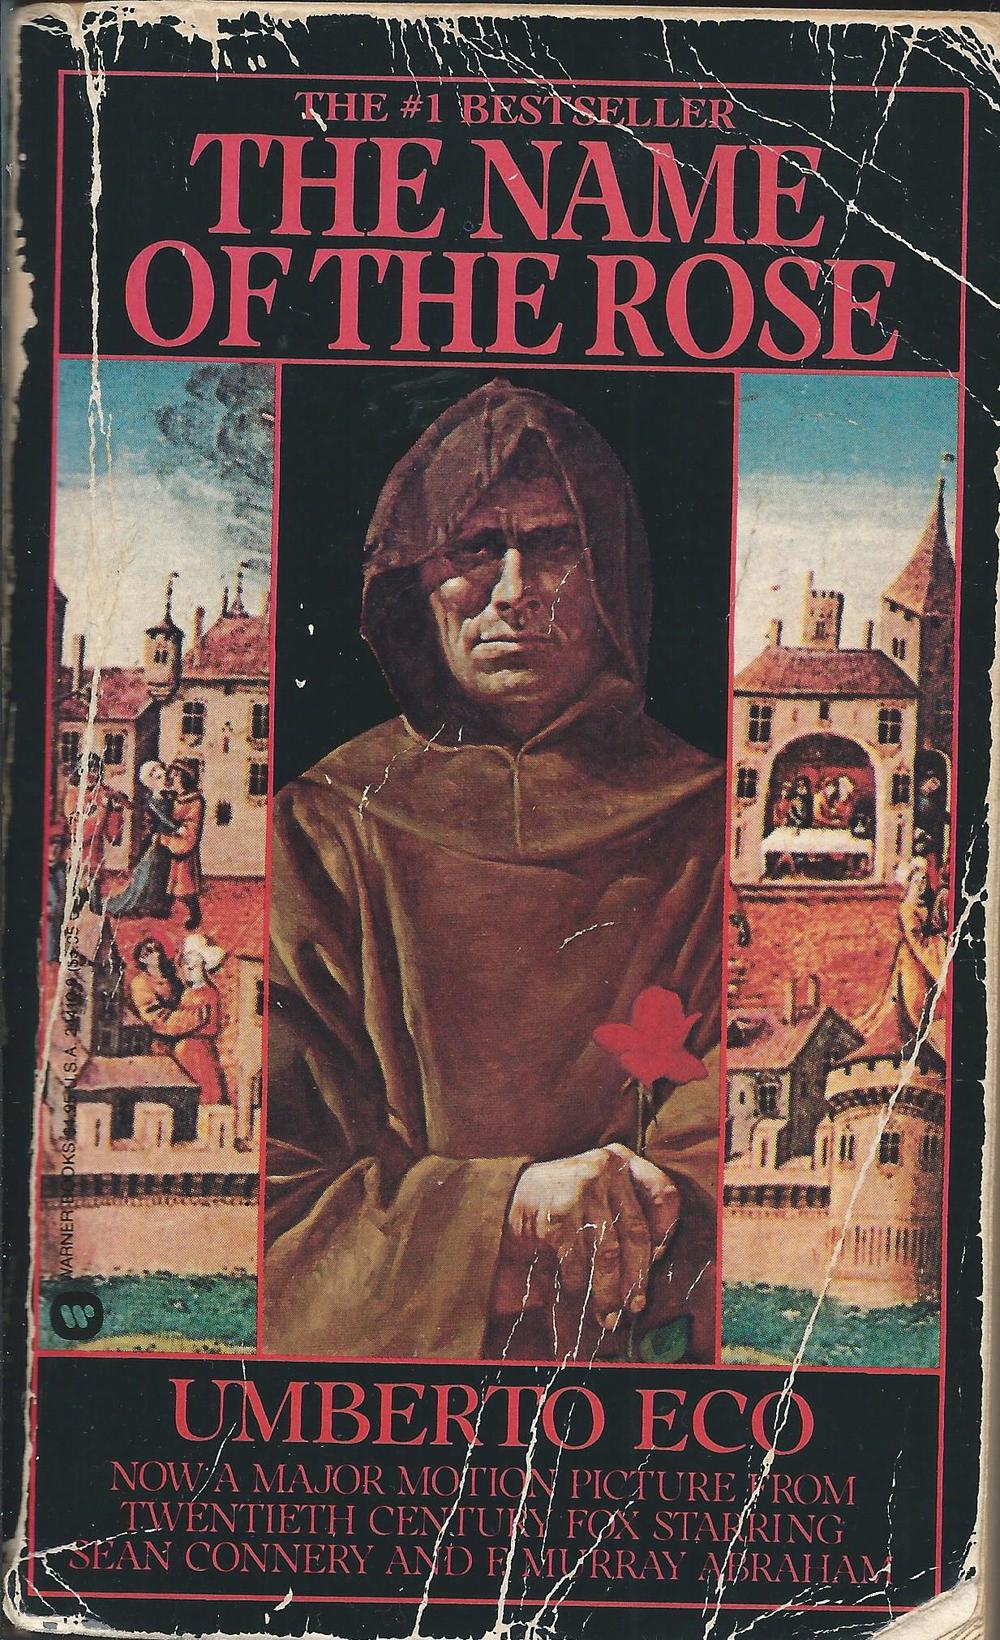 img - The Name of the Rose by Umberto Eco (1980, tr. 1983)